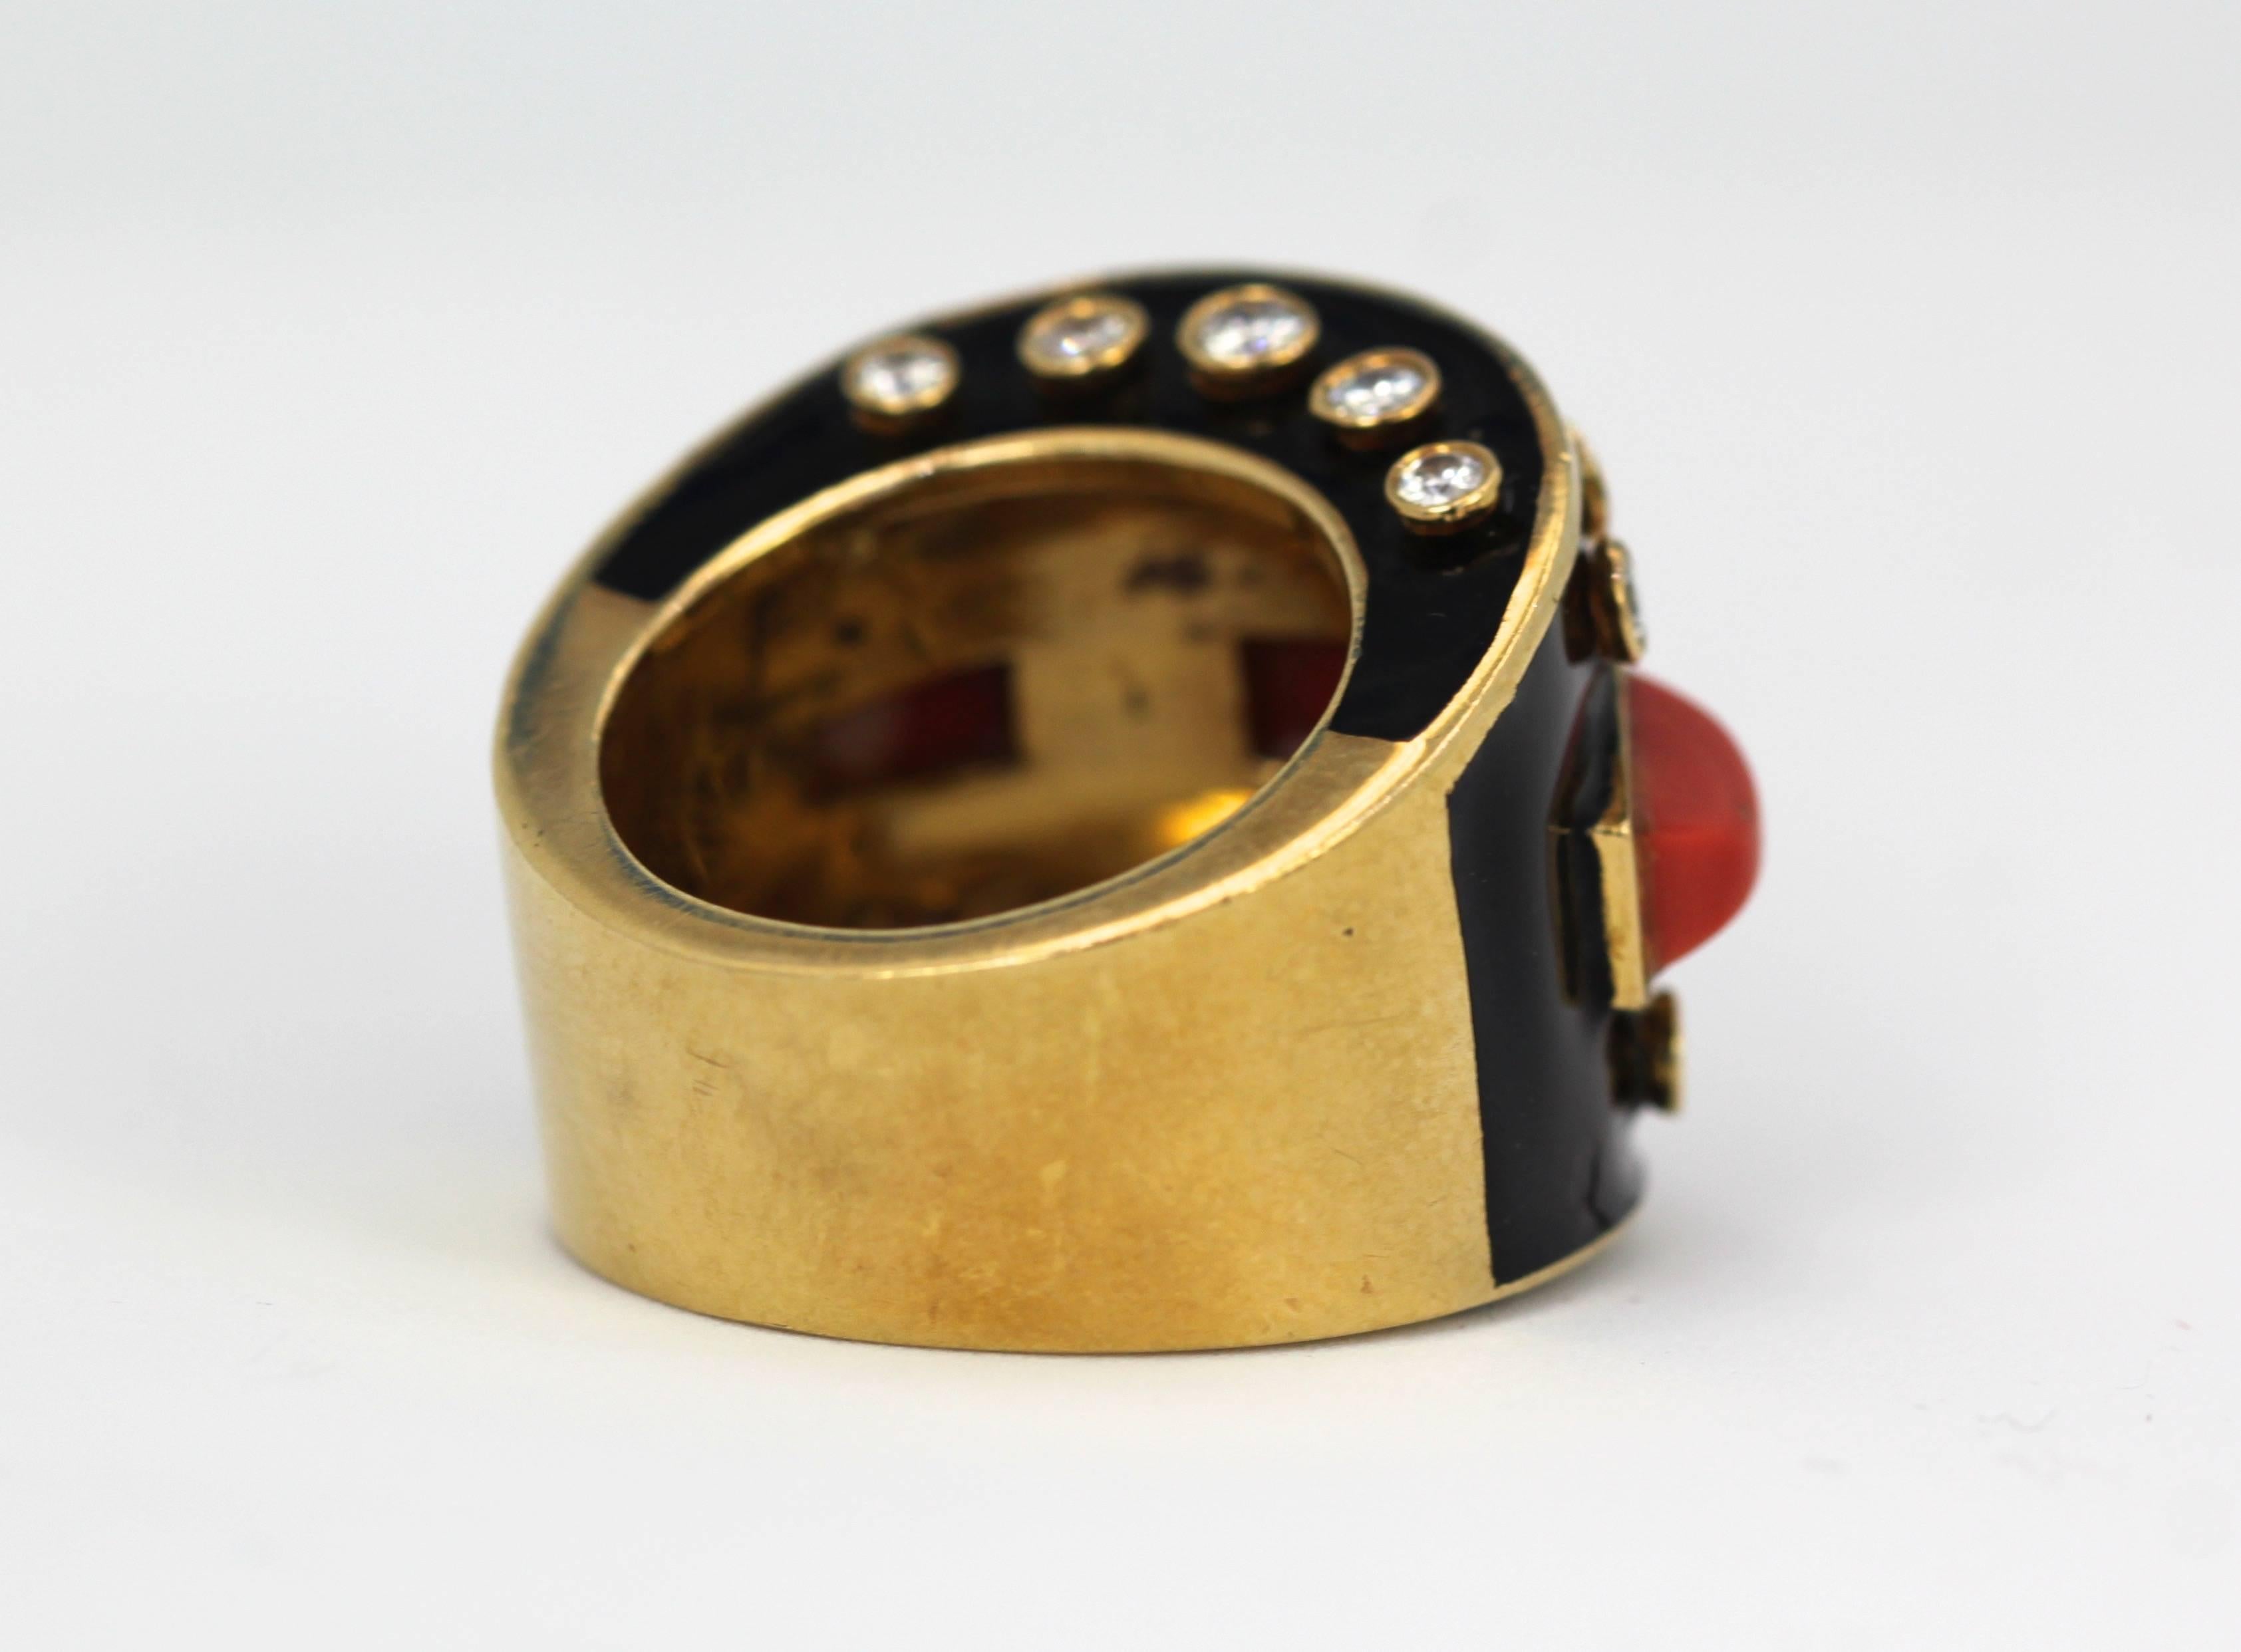 This Coral Diamond Black Enamel Ring is close to brand new and only worn a few times.  It is the Coral 